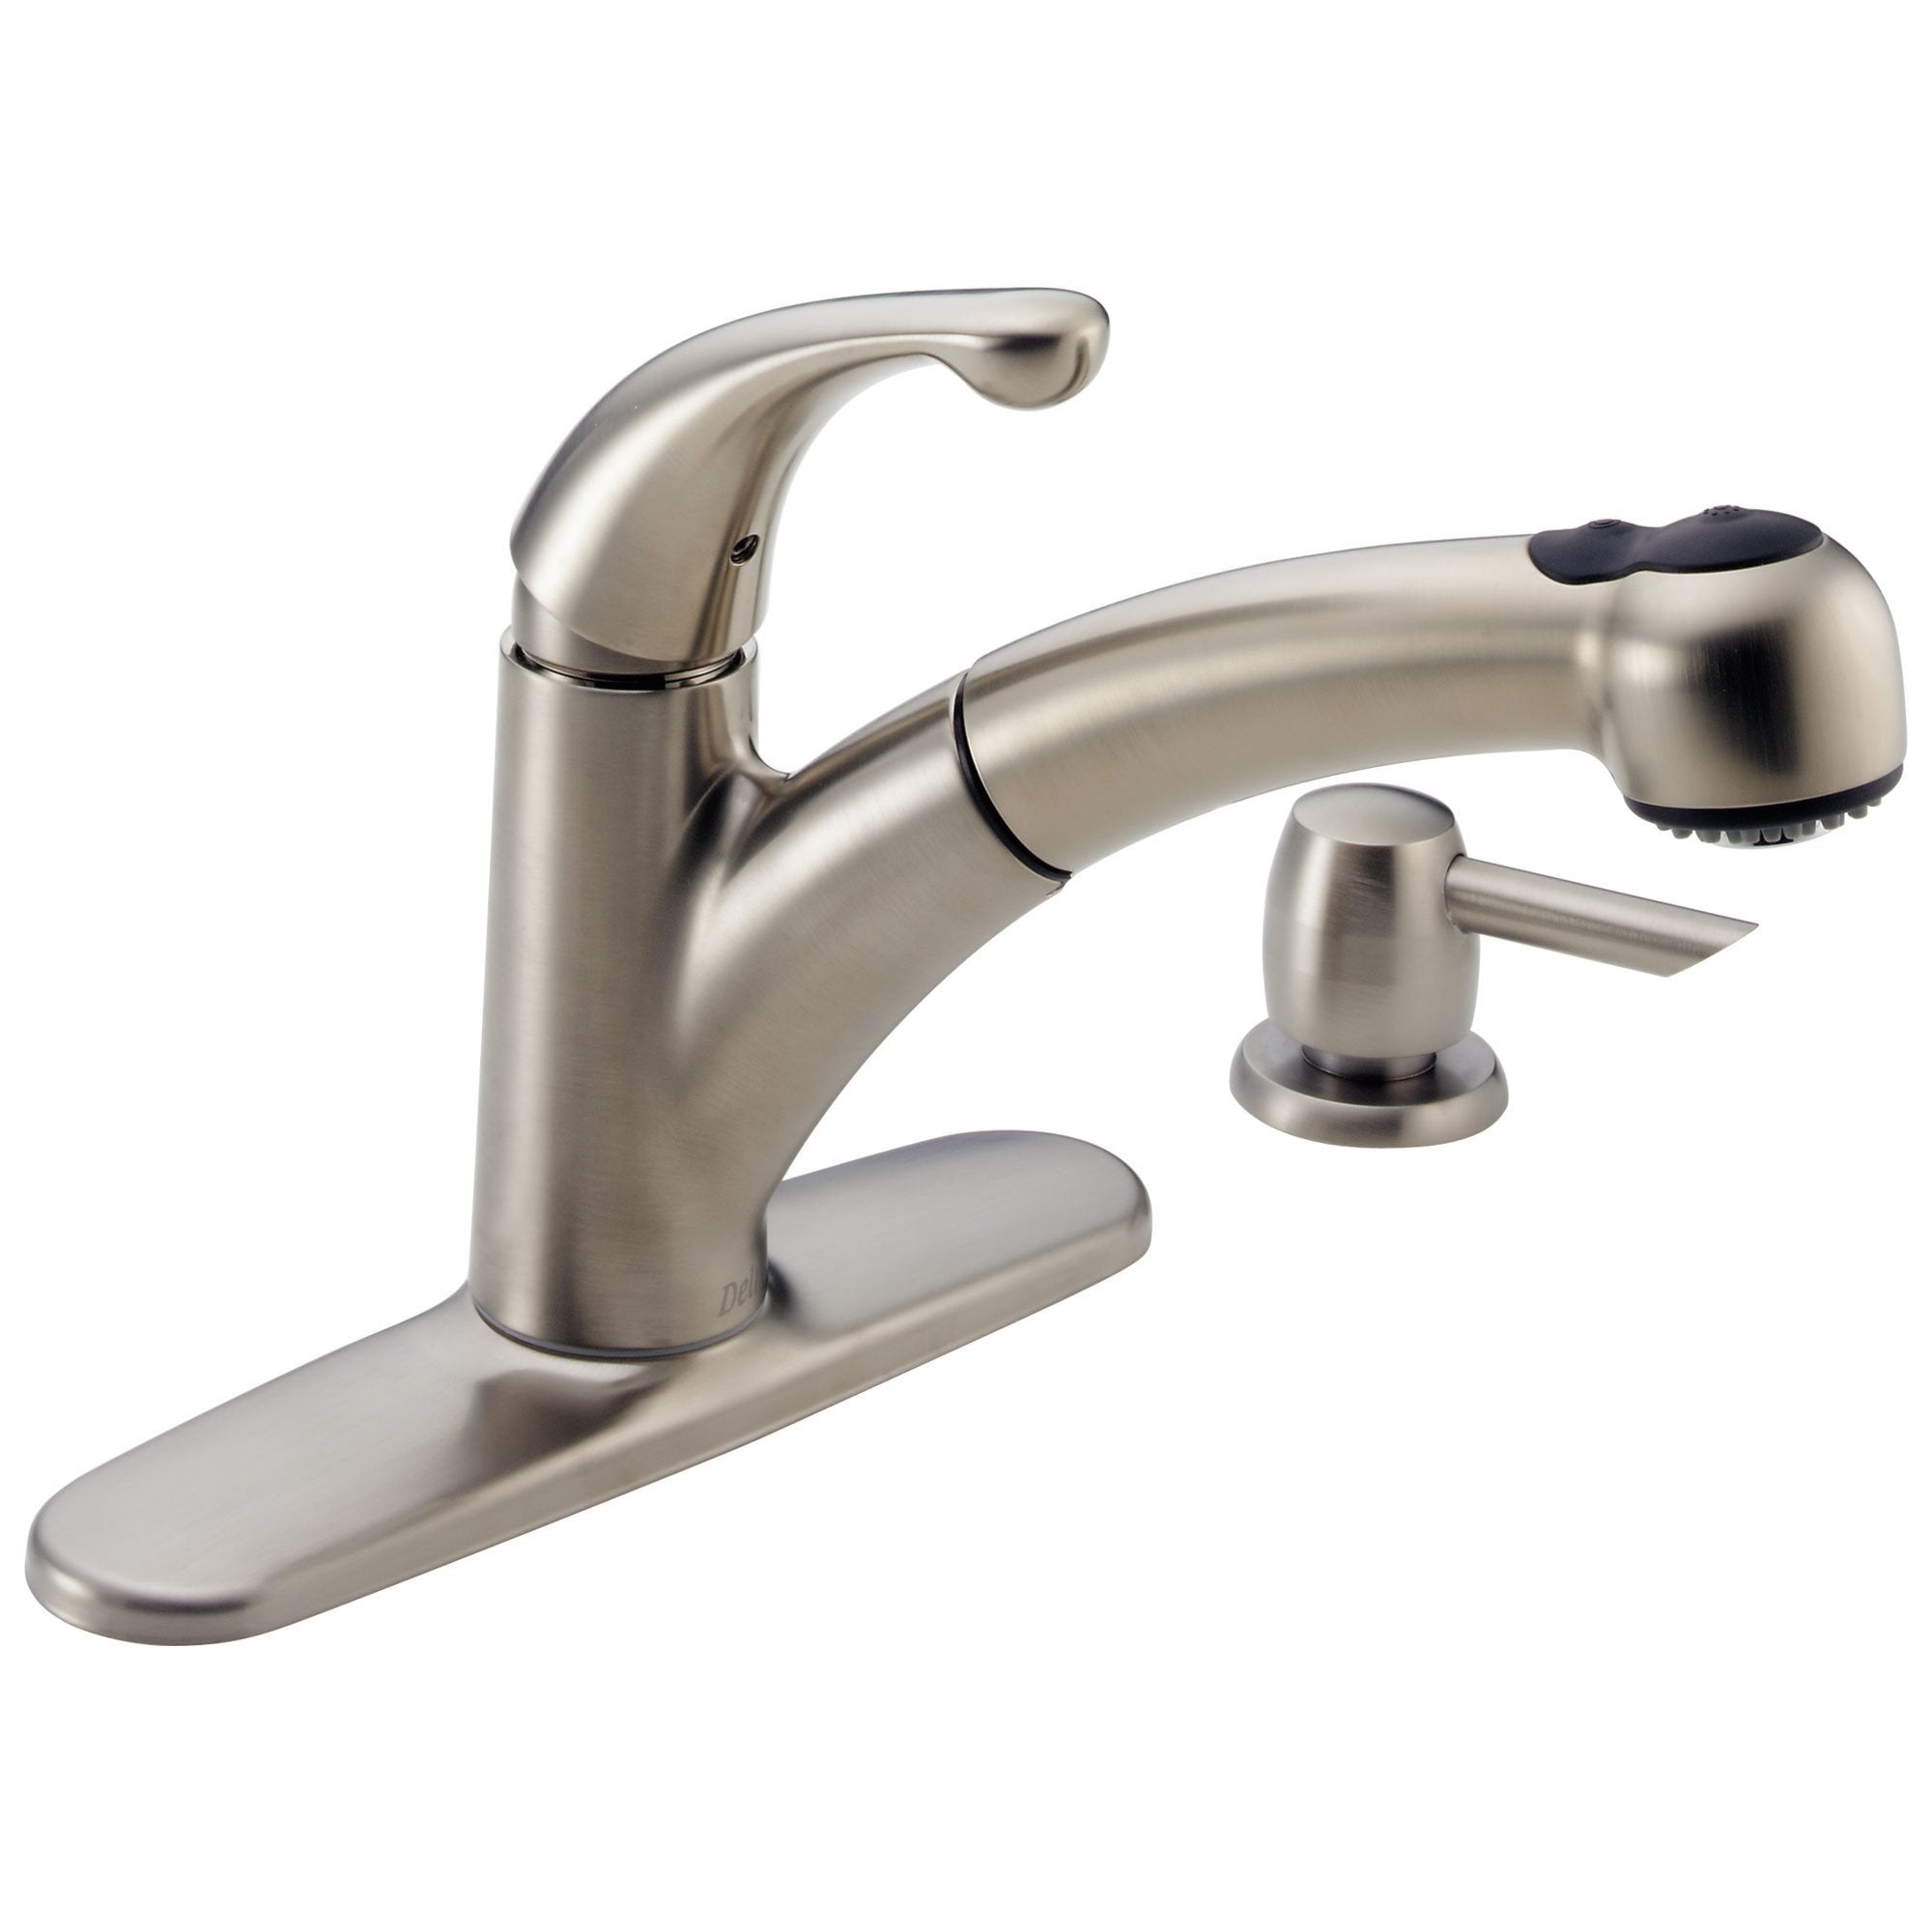 Delta Stainless Steel Finish Single Handle Pull-Out Kitchen Sink Faucet with Soap Dispenser 447045